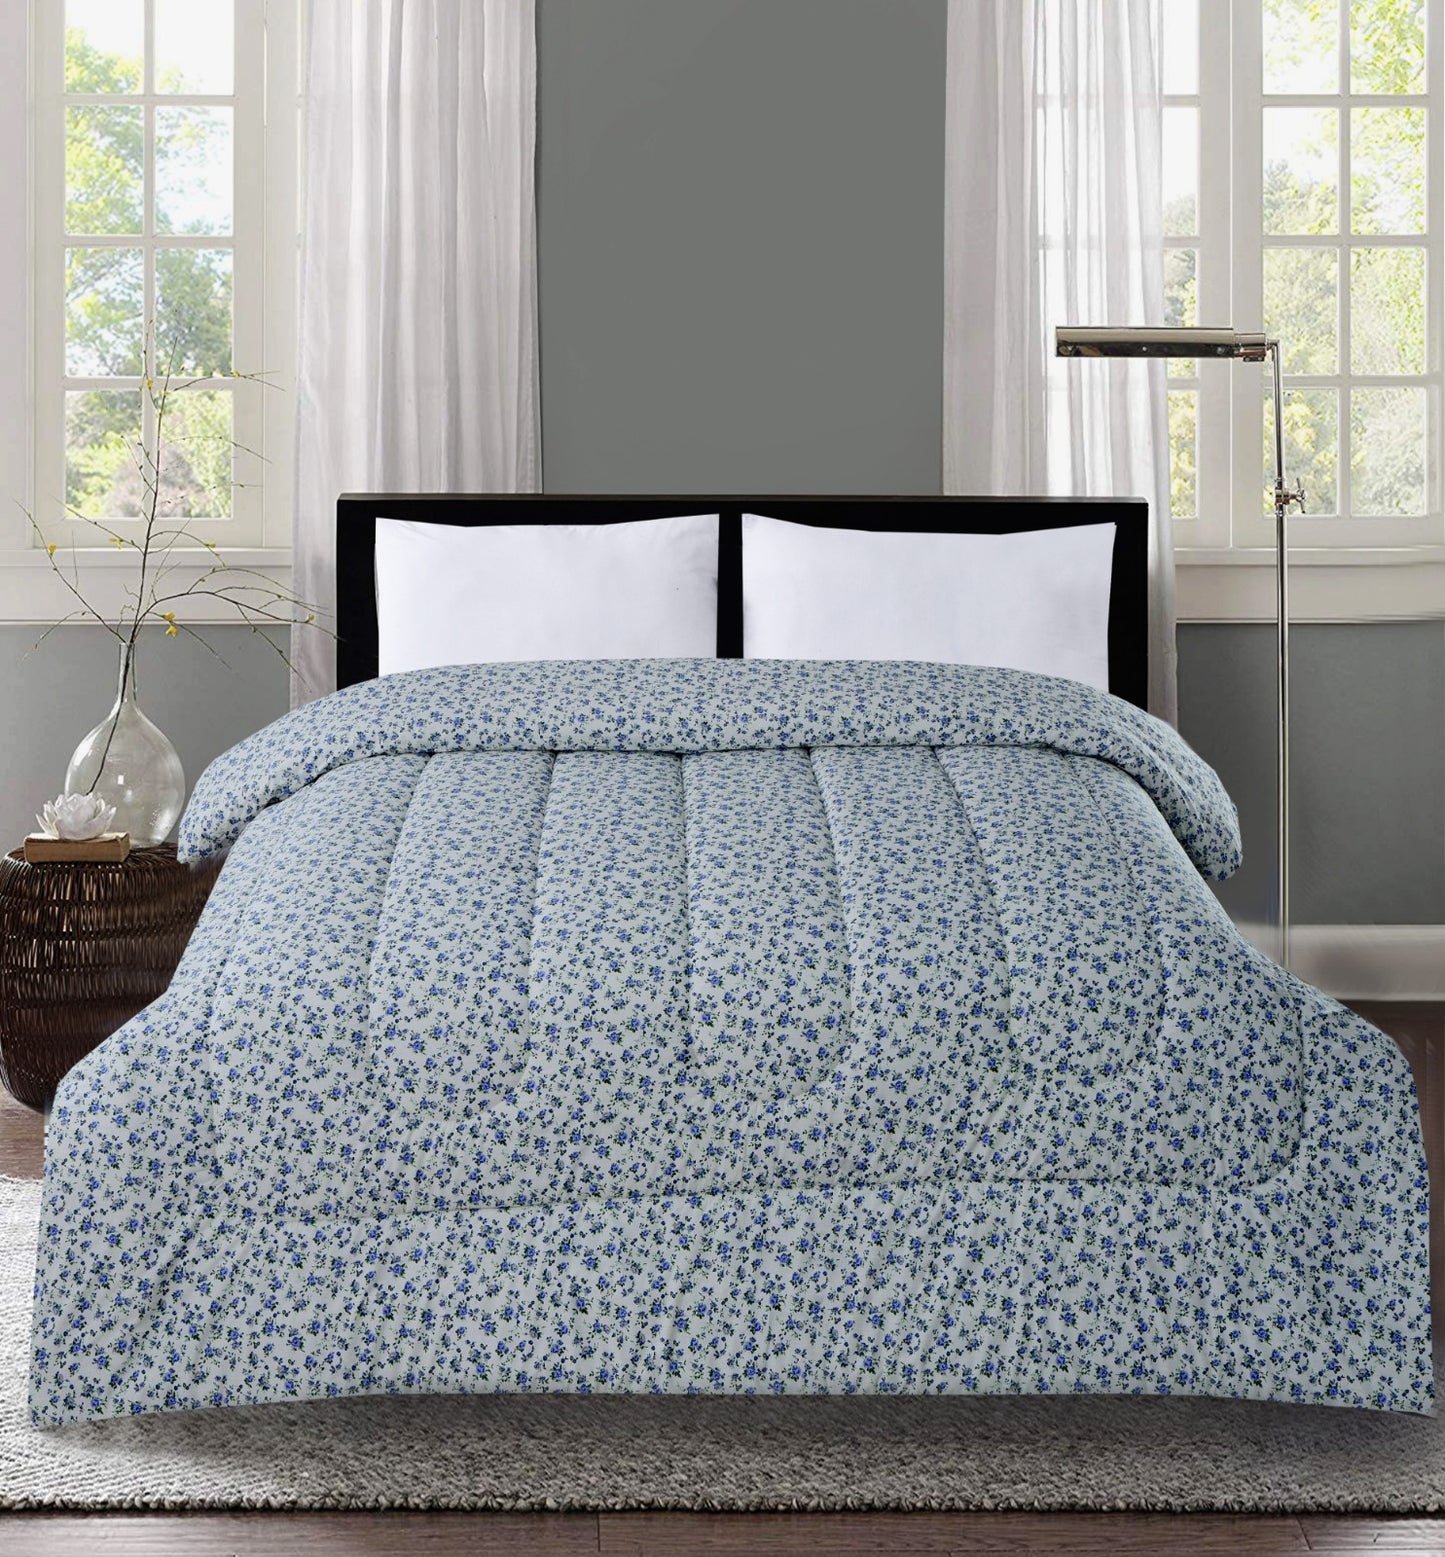 1 PC Double Winter Comforter-Bluebell